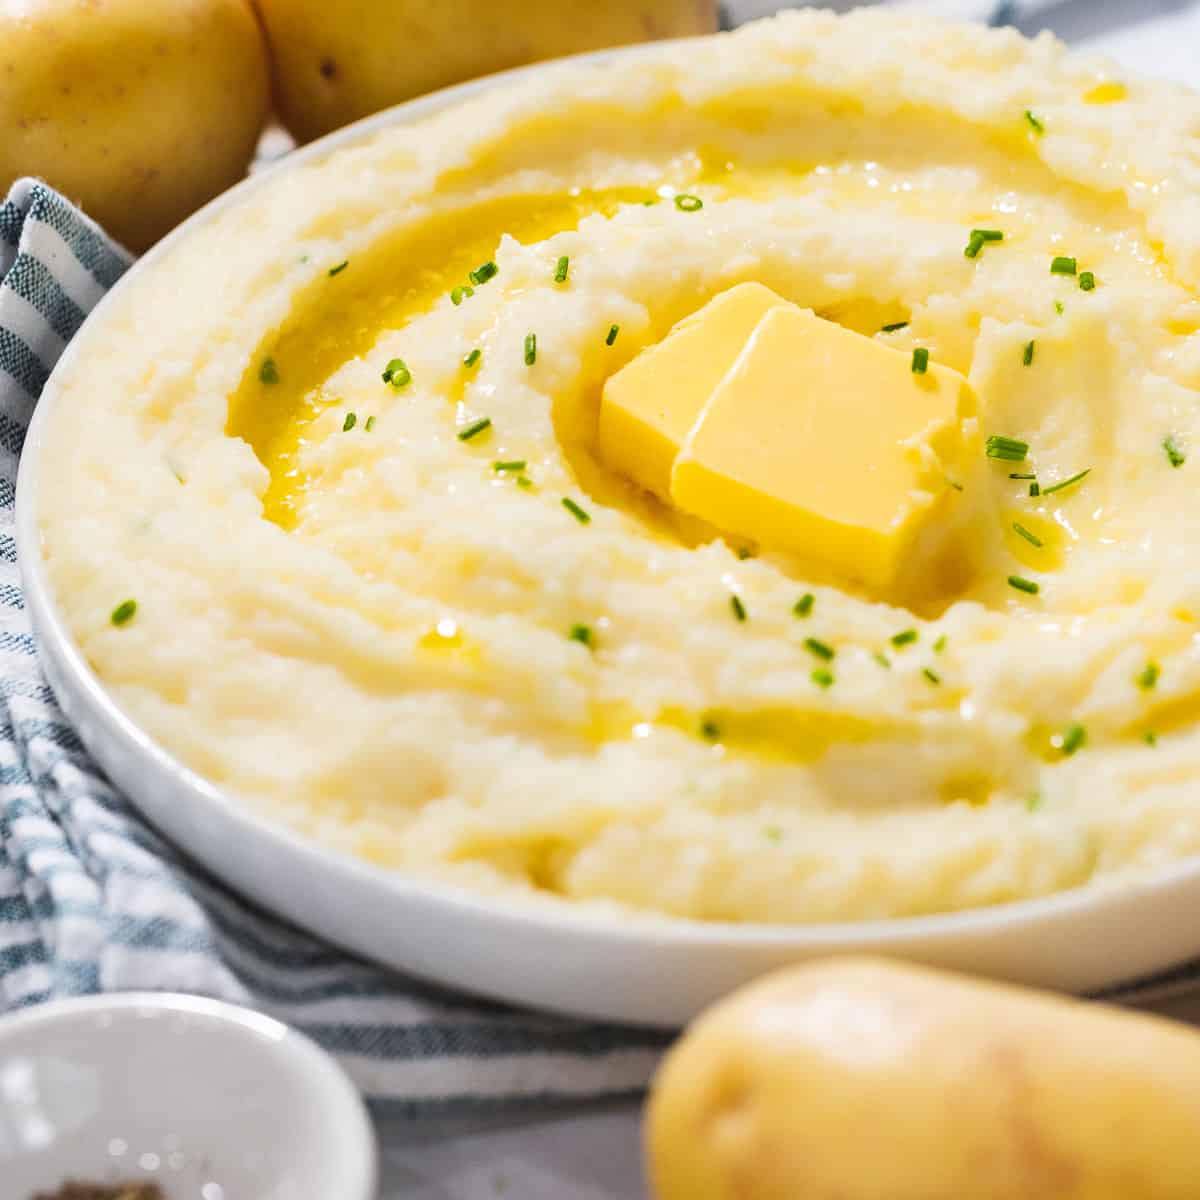 Instant Pot mashed potatoes made with Yukon gold potatoes.